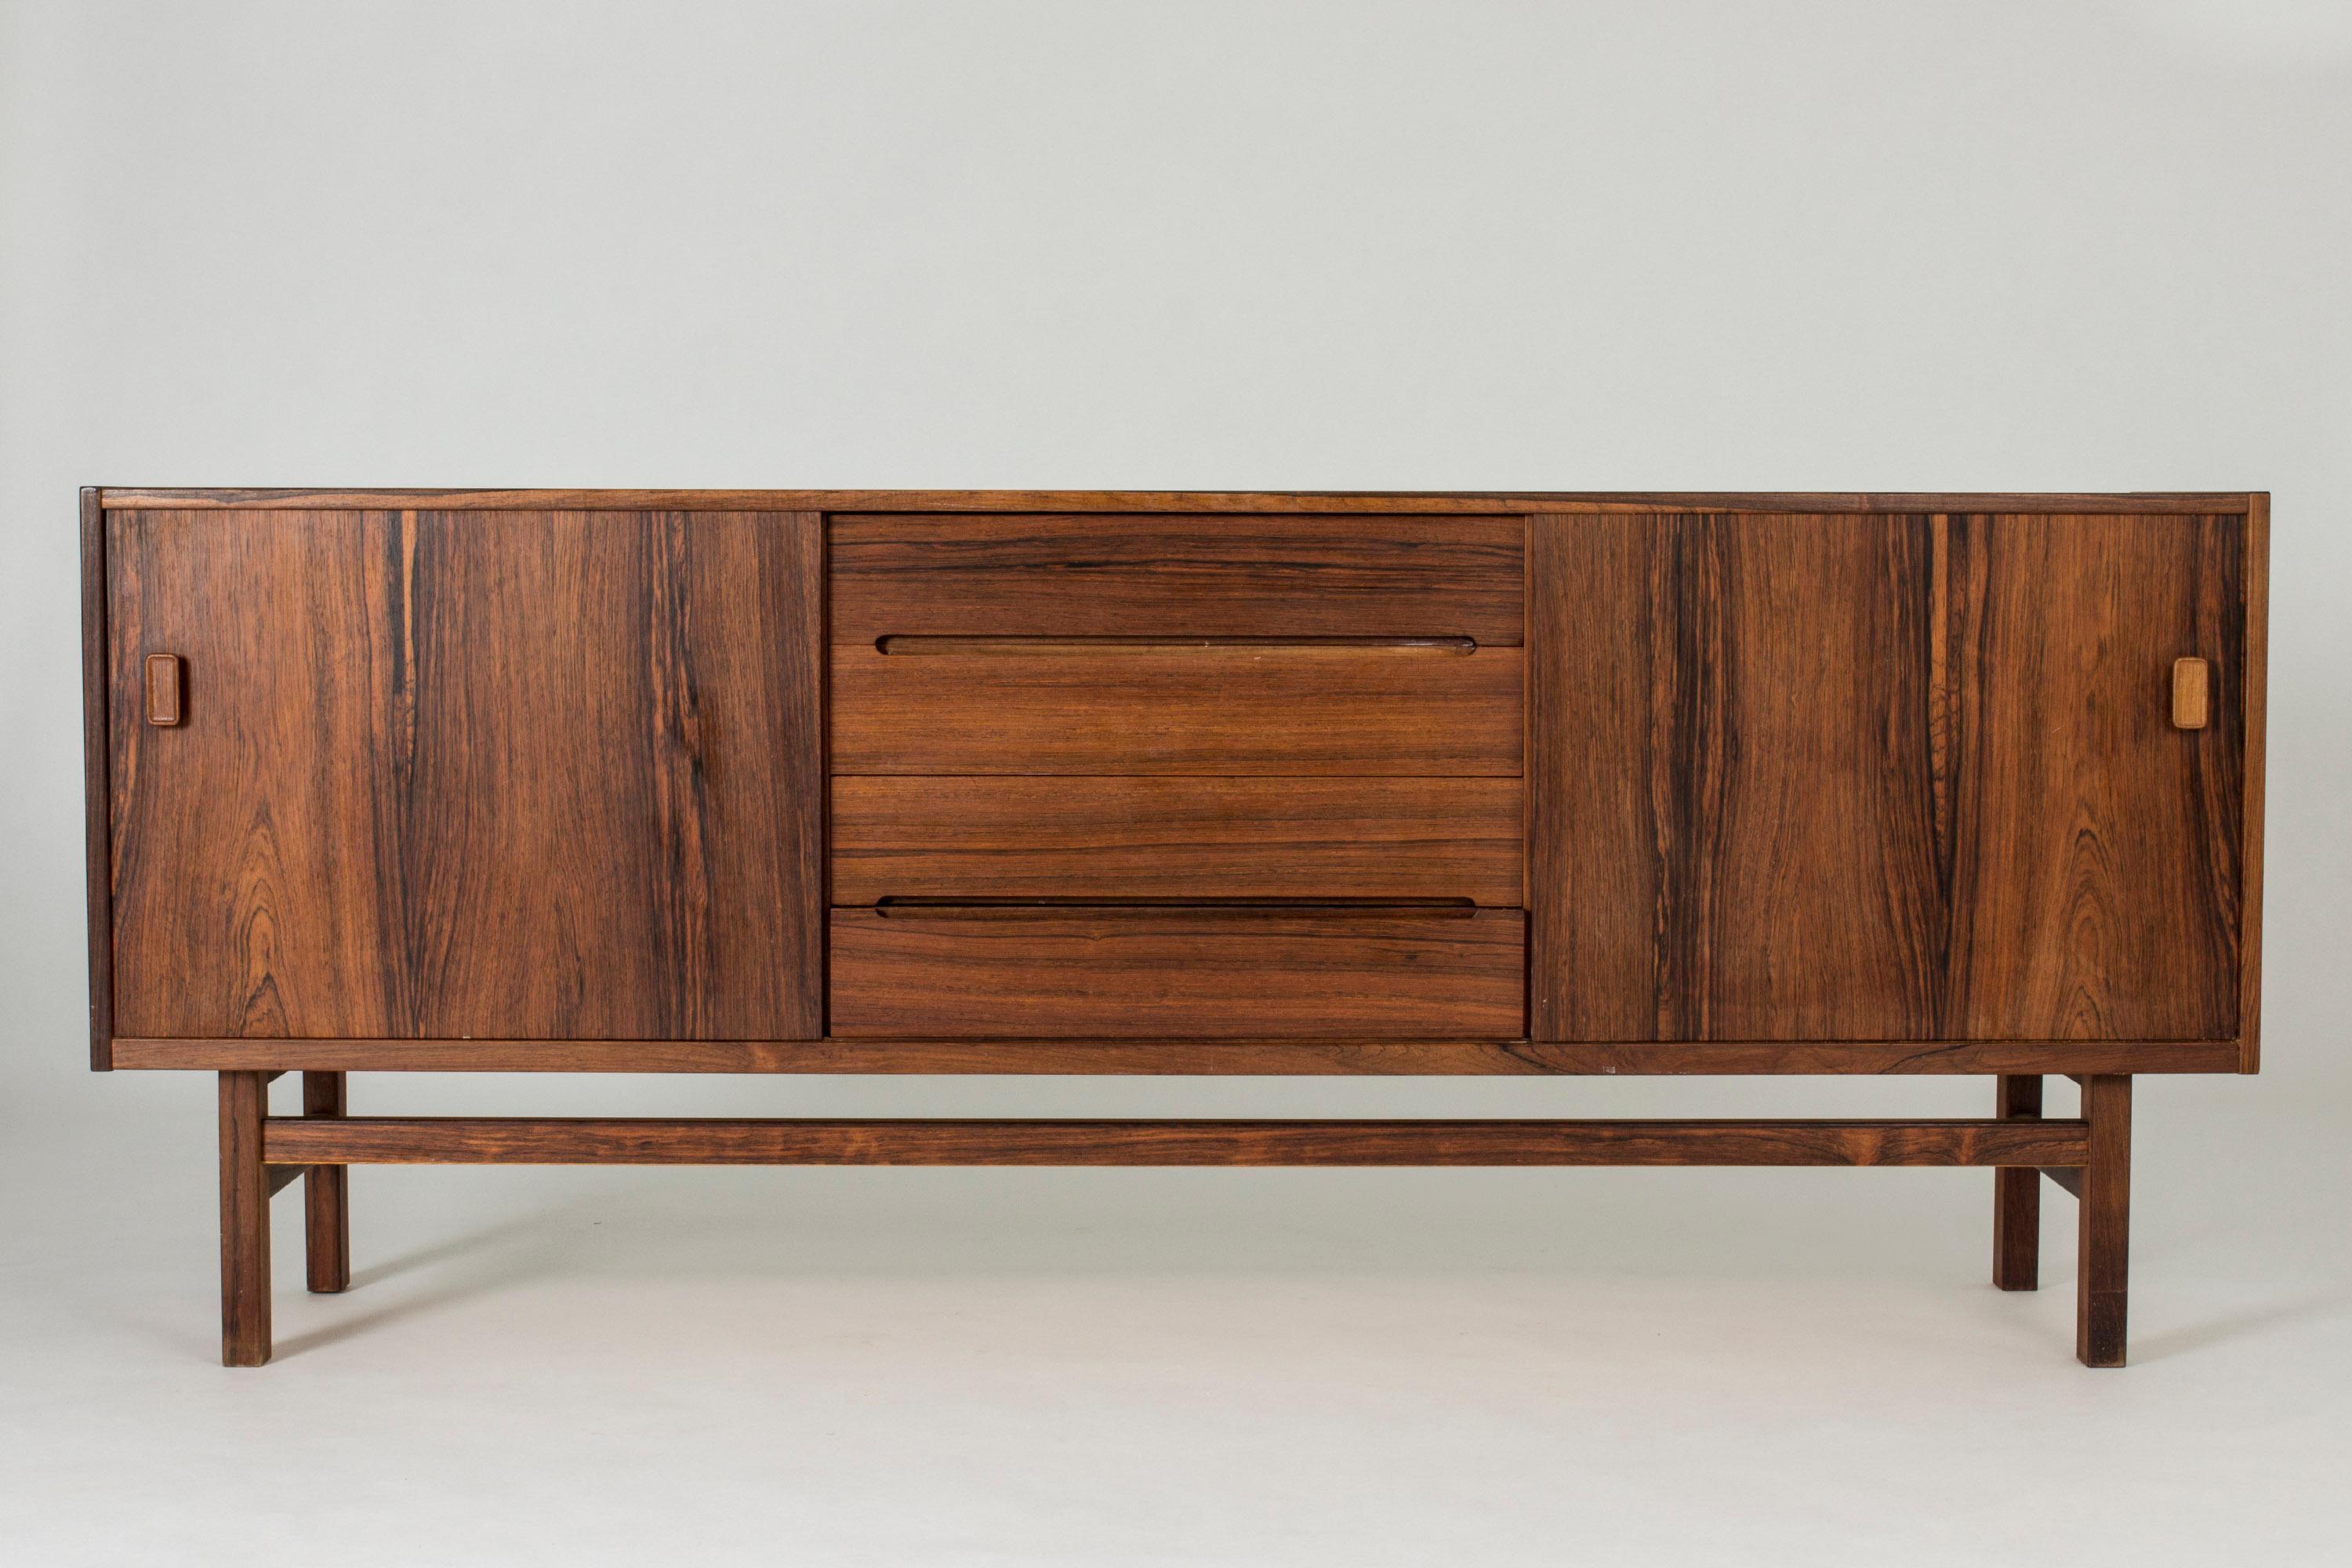 Cool rosewood sideboard by Nils Jonsson. Beautifully sculpted handles in the drawers in the middle and veneer laid in contrasting directions.